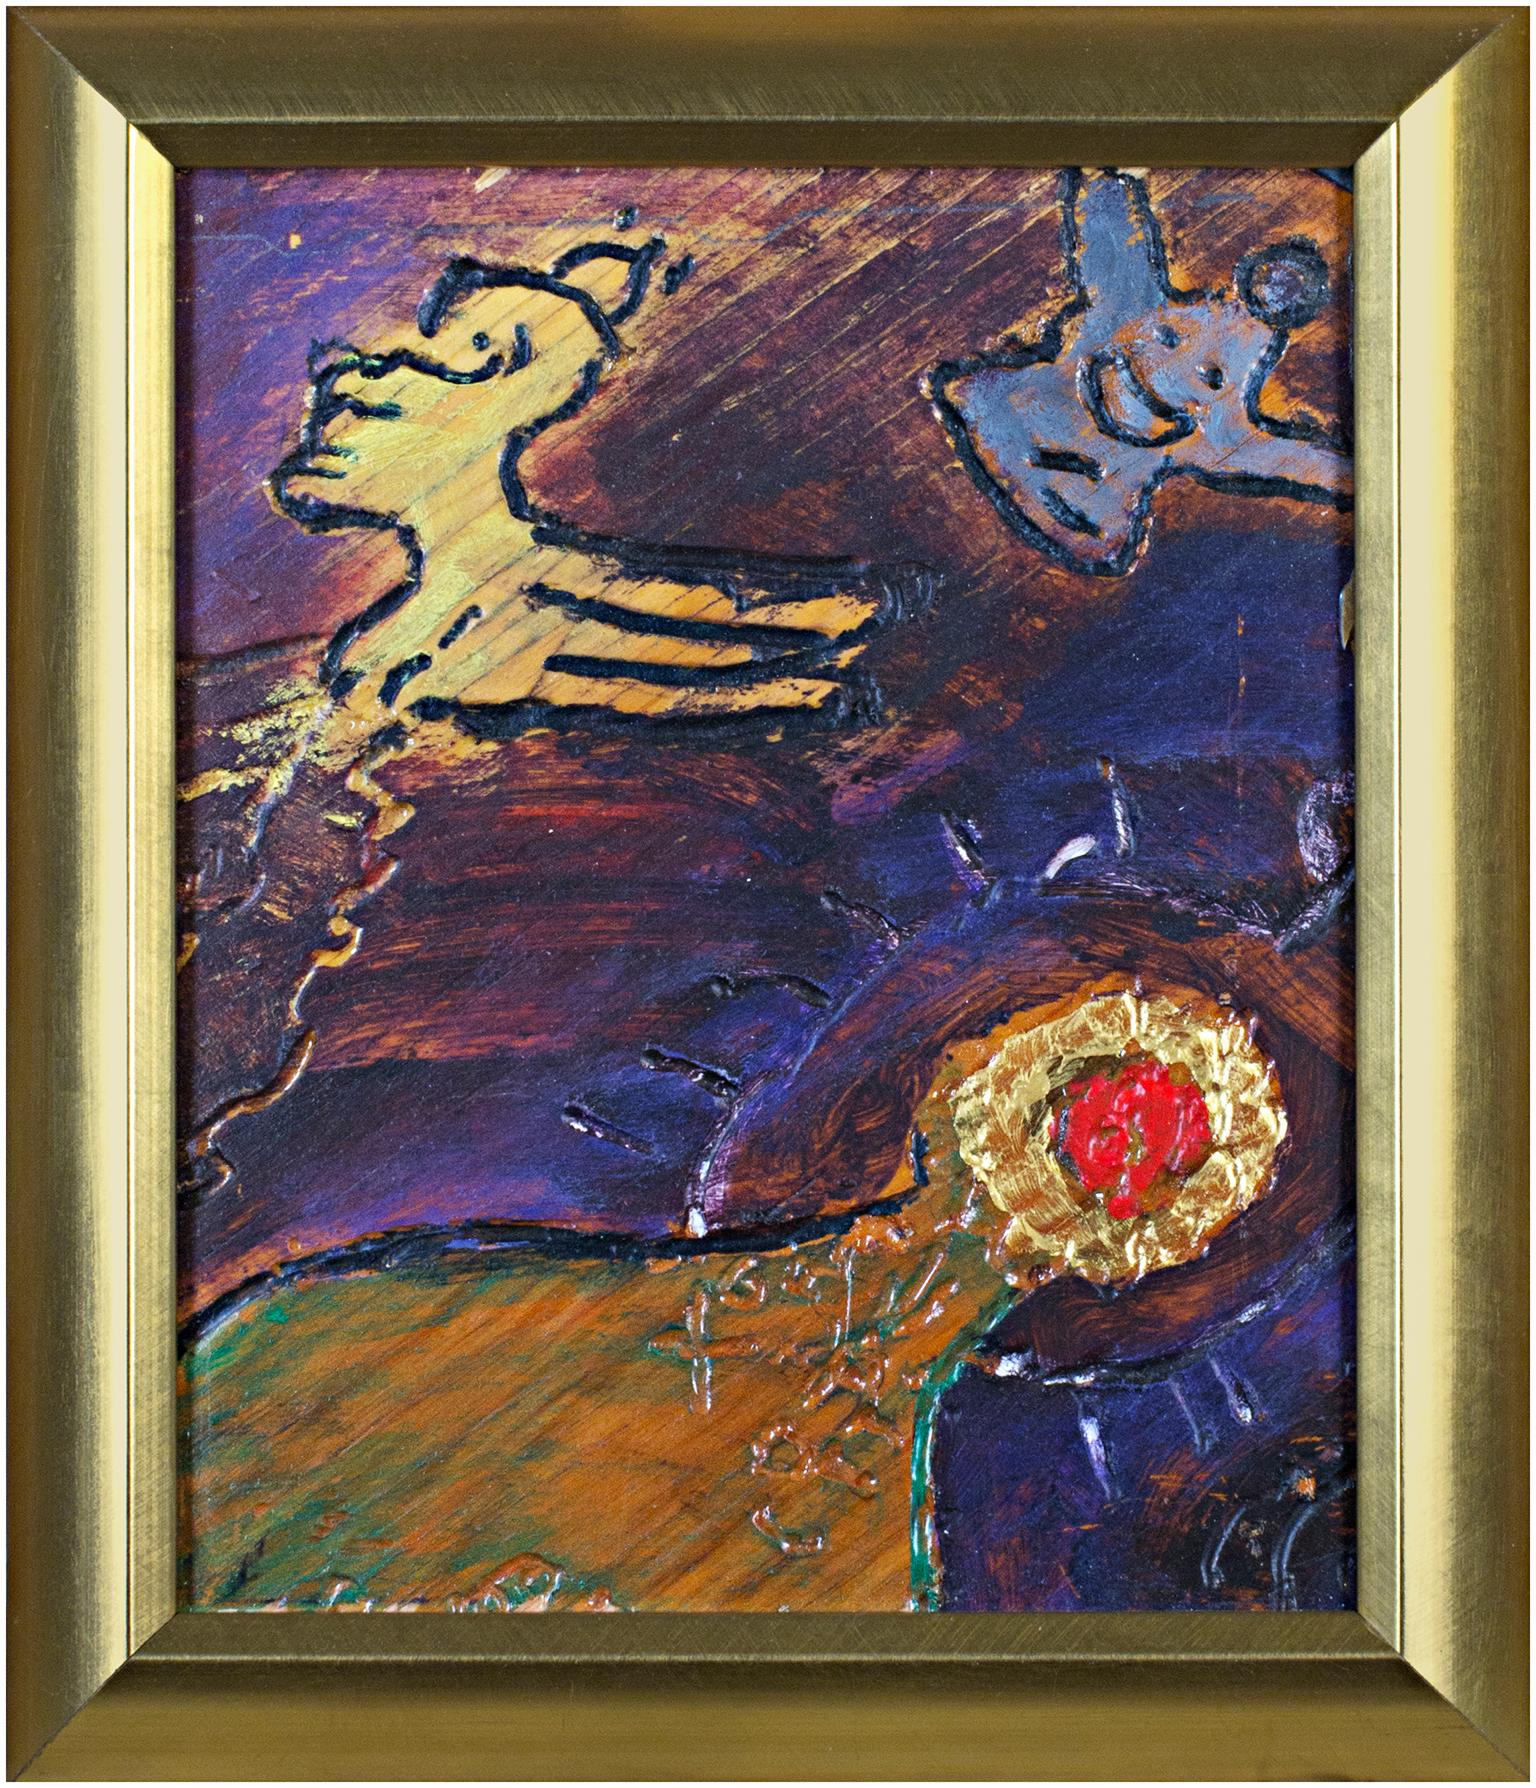 "Open the Bottle (Let in the Darkness)" is an original oil painting on wood panel by Robert Richter in a gold frame and signed on the verso. It features saturated, deep colors and whimsical figures. The bottle of the the title occupies the lower